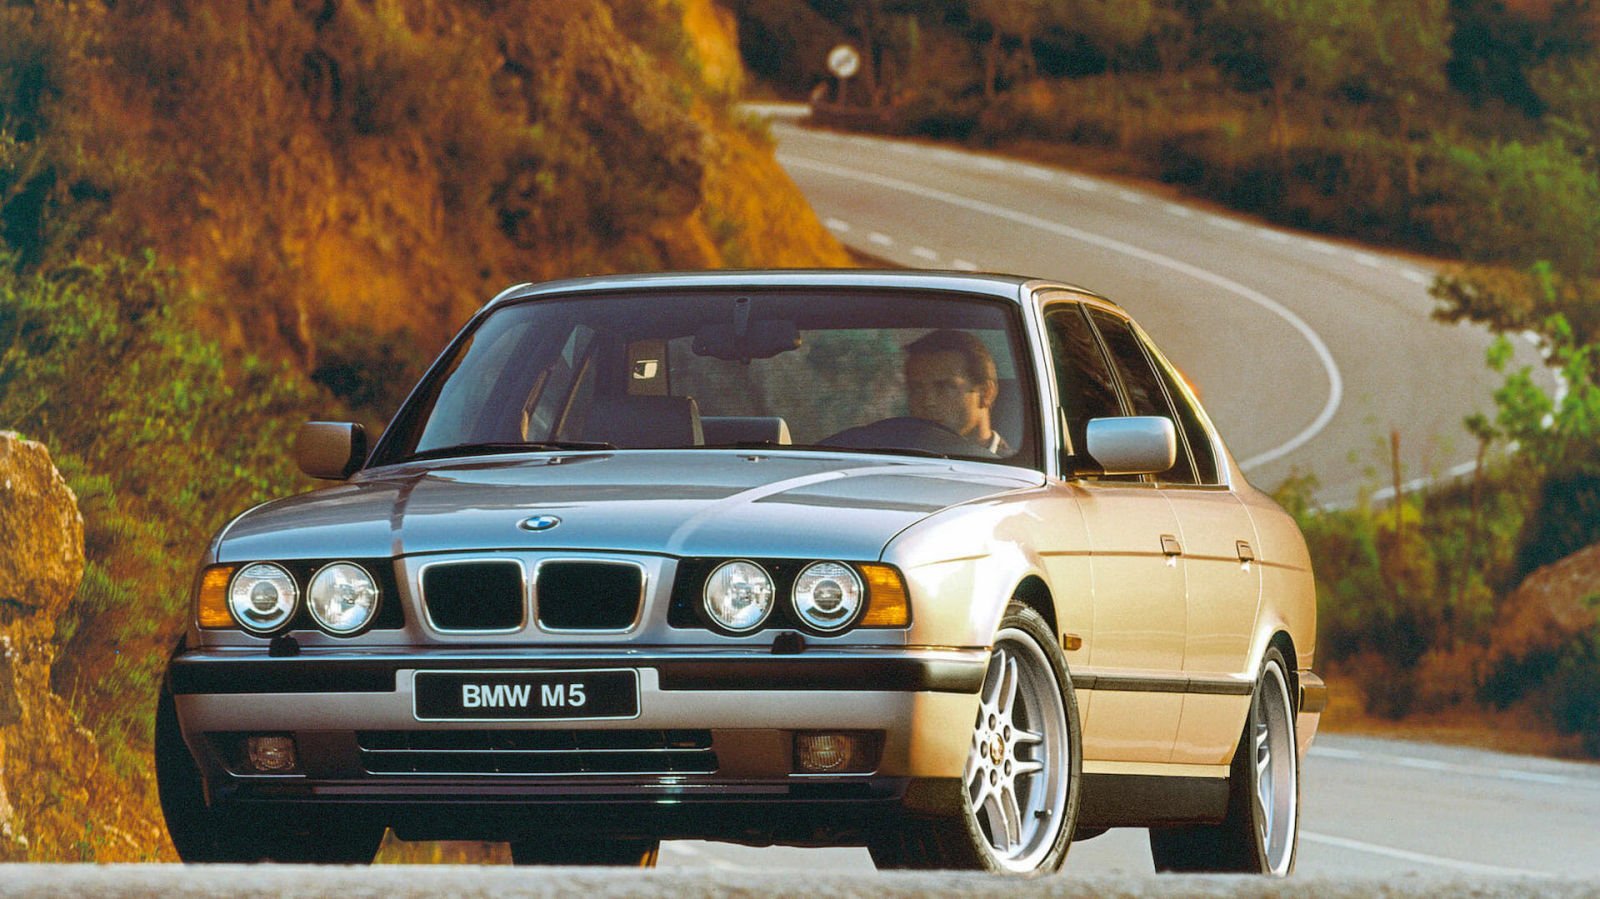 Illustration for article titled My take on why BMW design is so bad nowadays